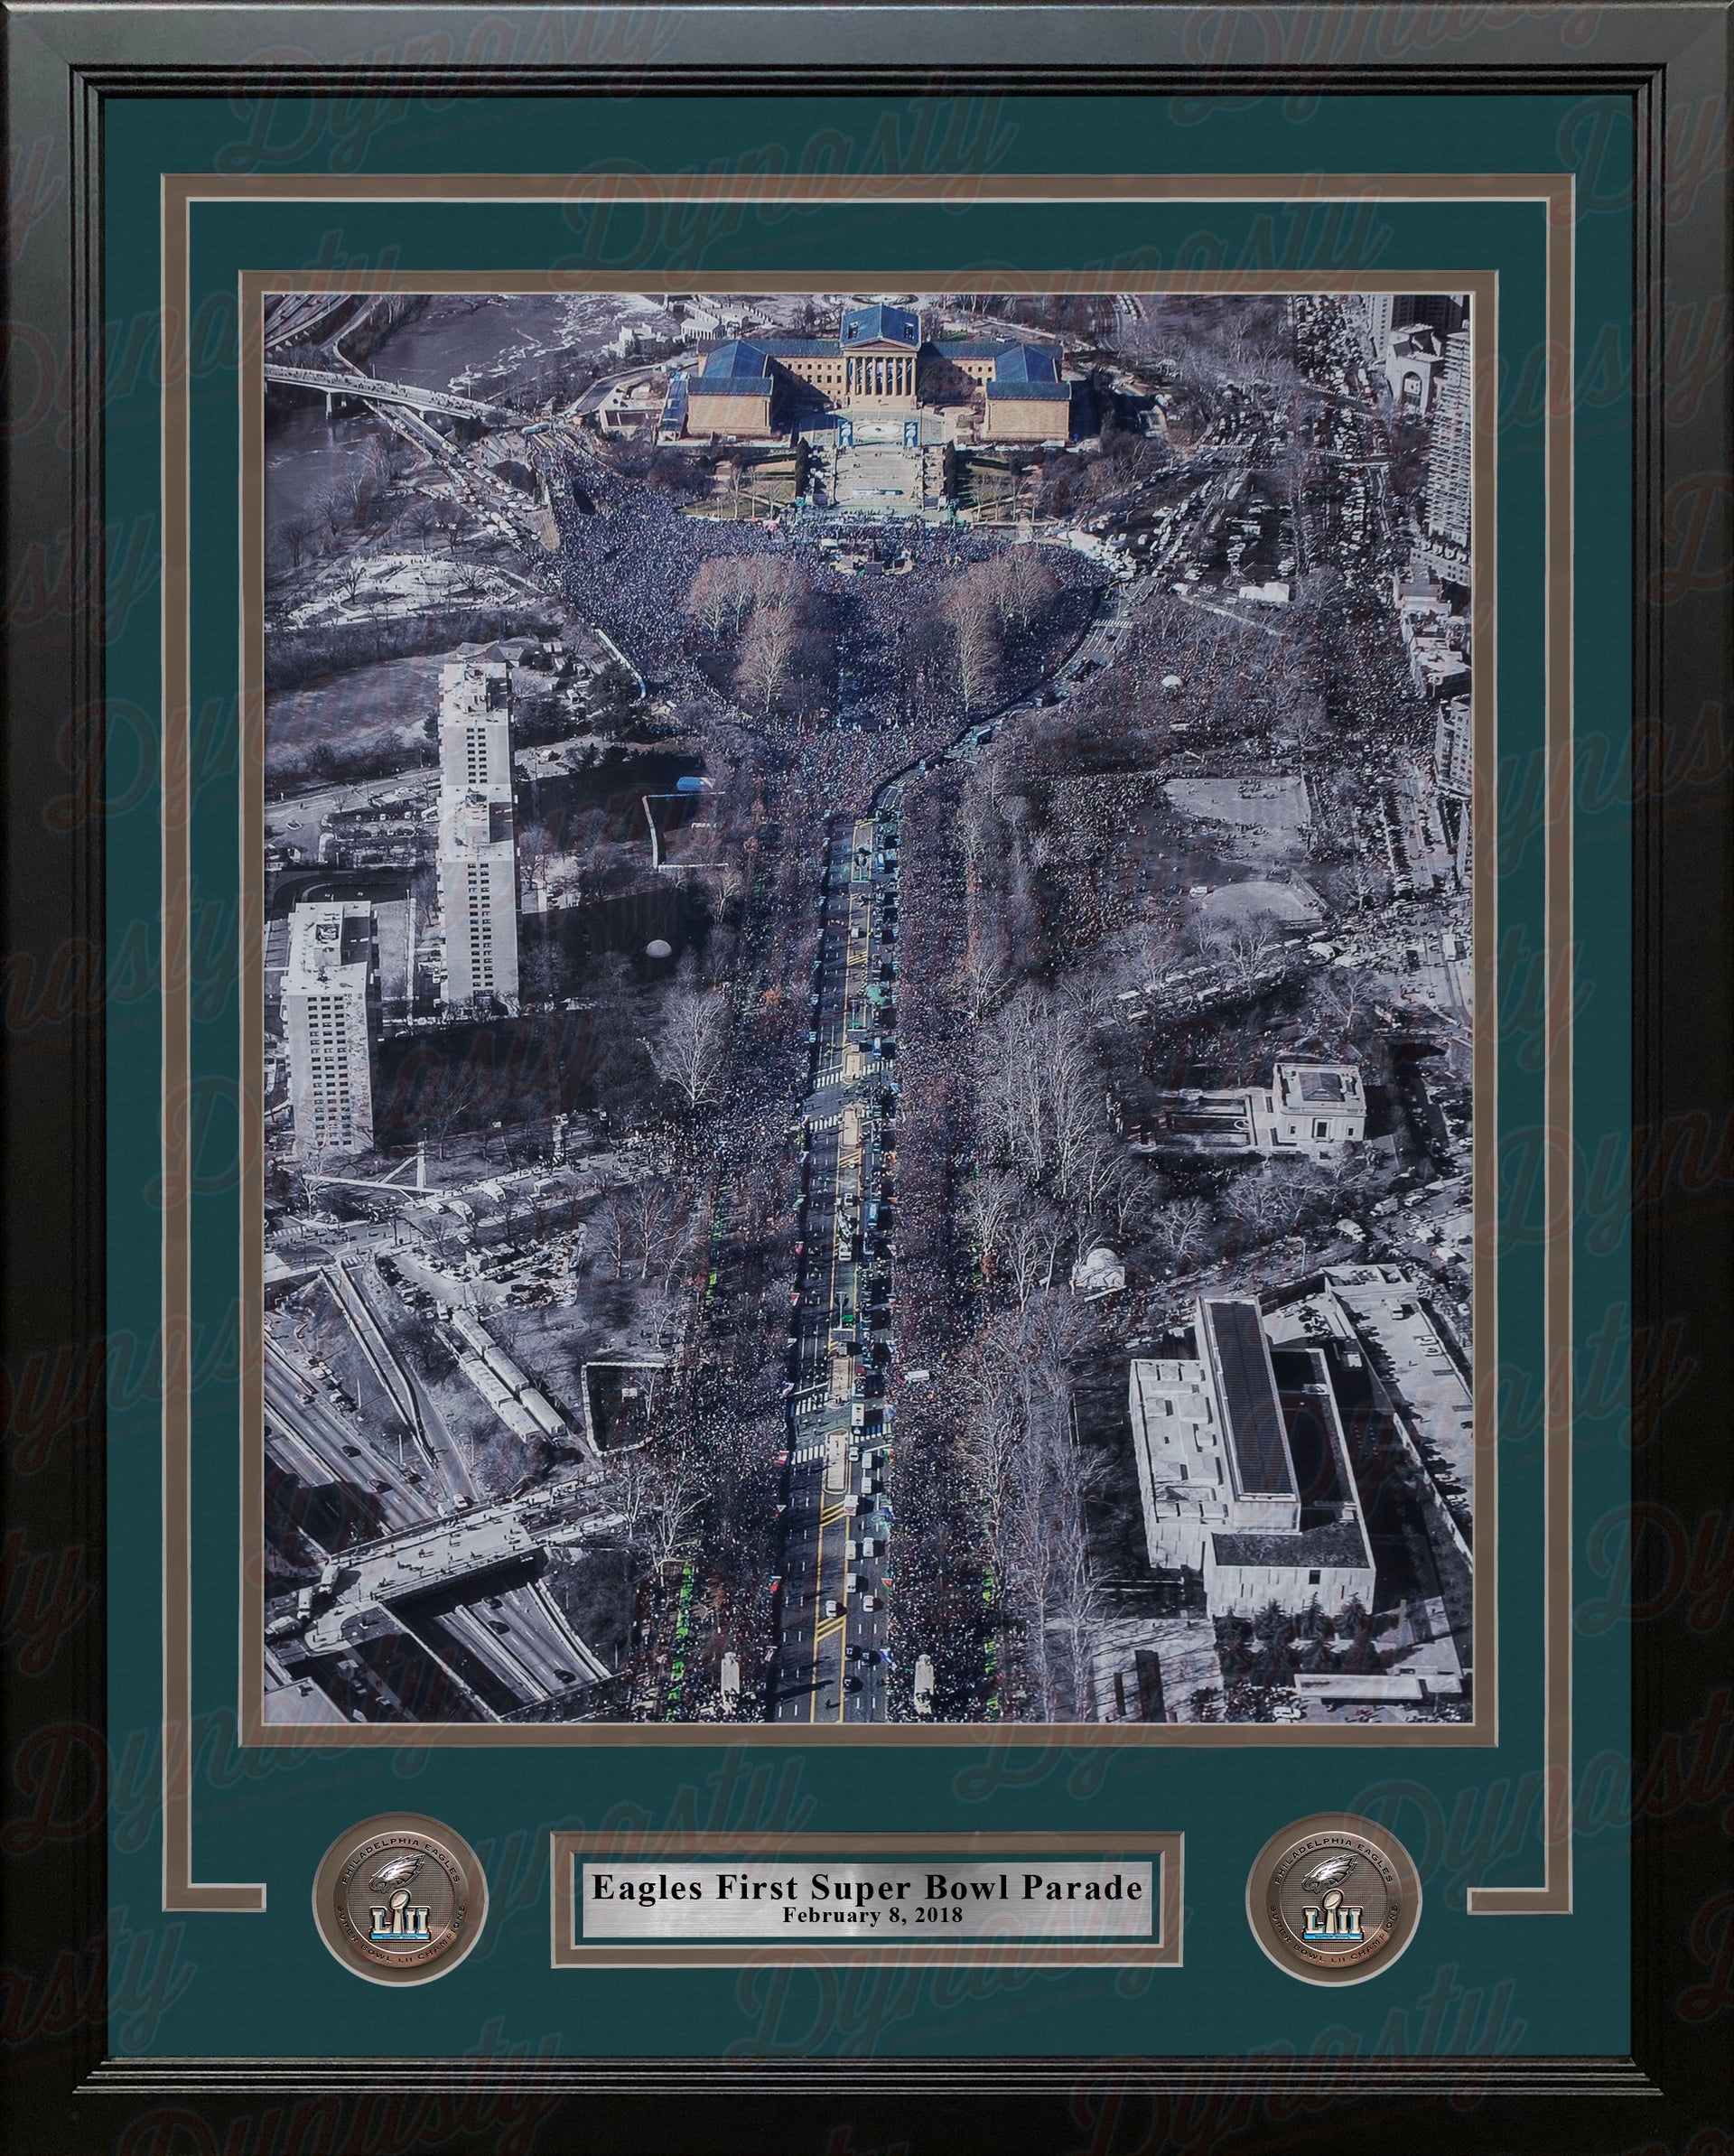 Philadelphia Eagles Super Bowl LII Champions Parade NFL Football Framed and Matted Photo - Dynasty Sports & Framing 